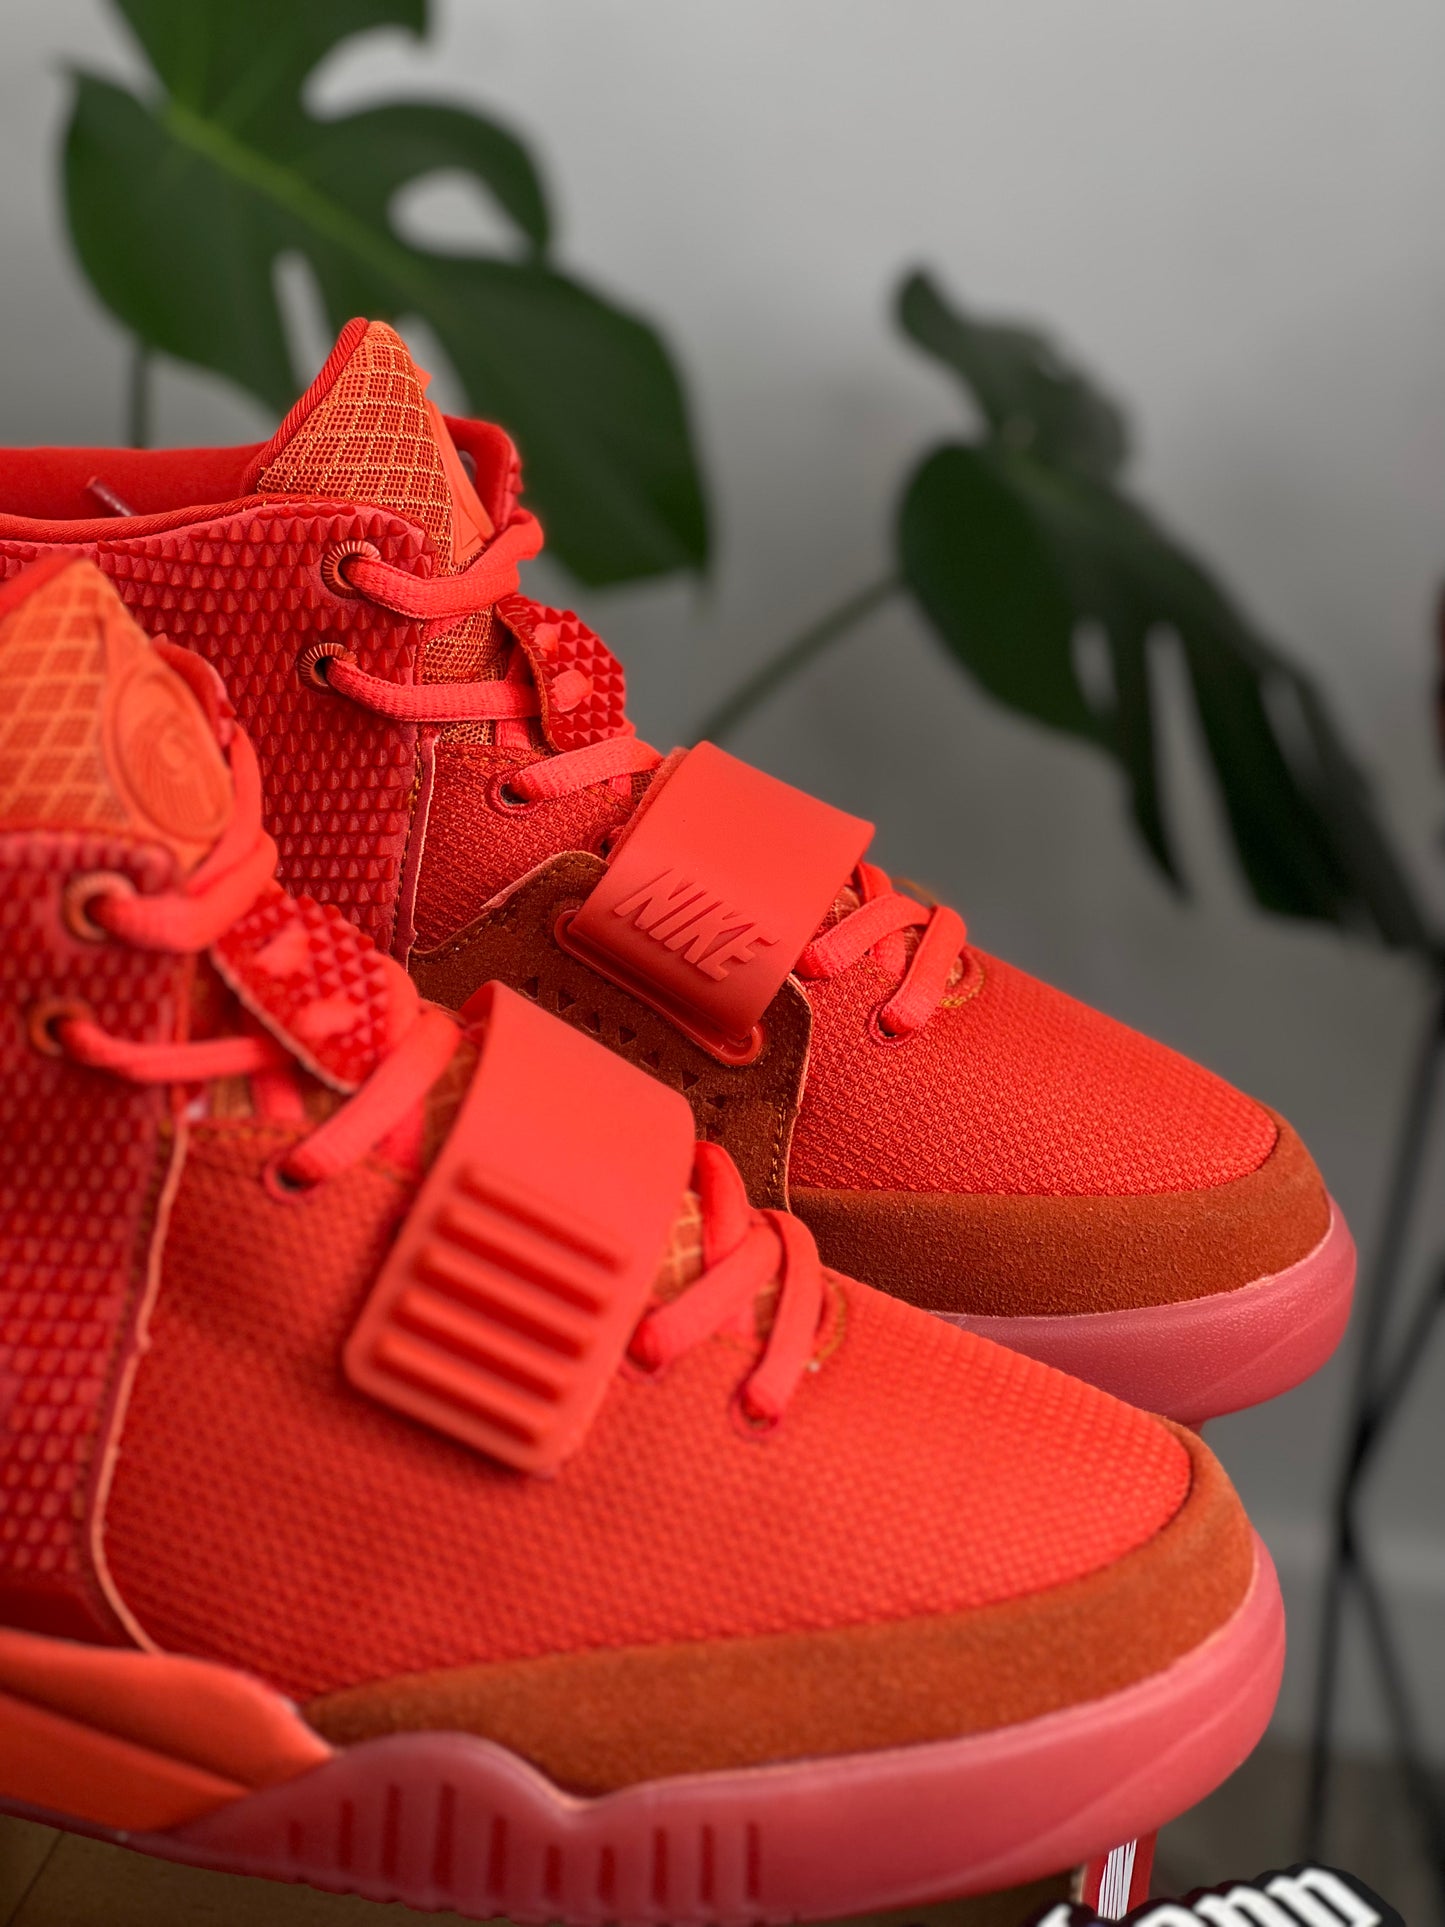 Nike Air Yeezy 2 SP RED